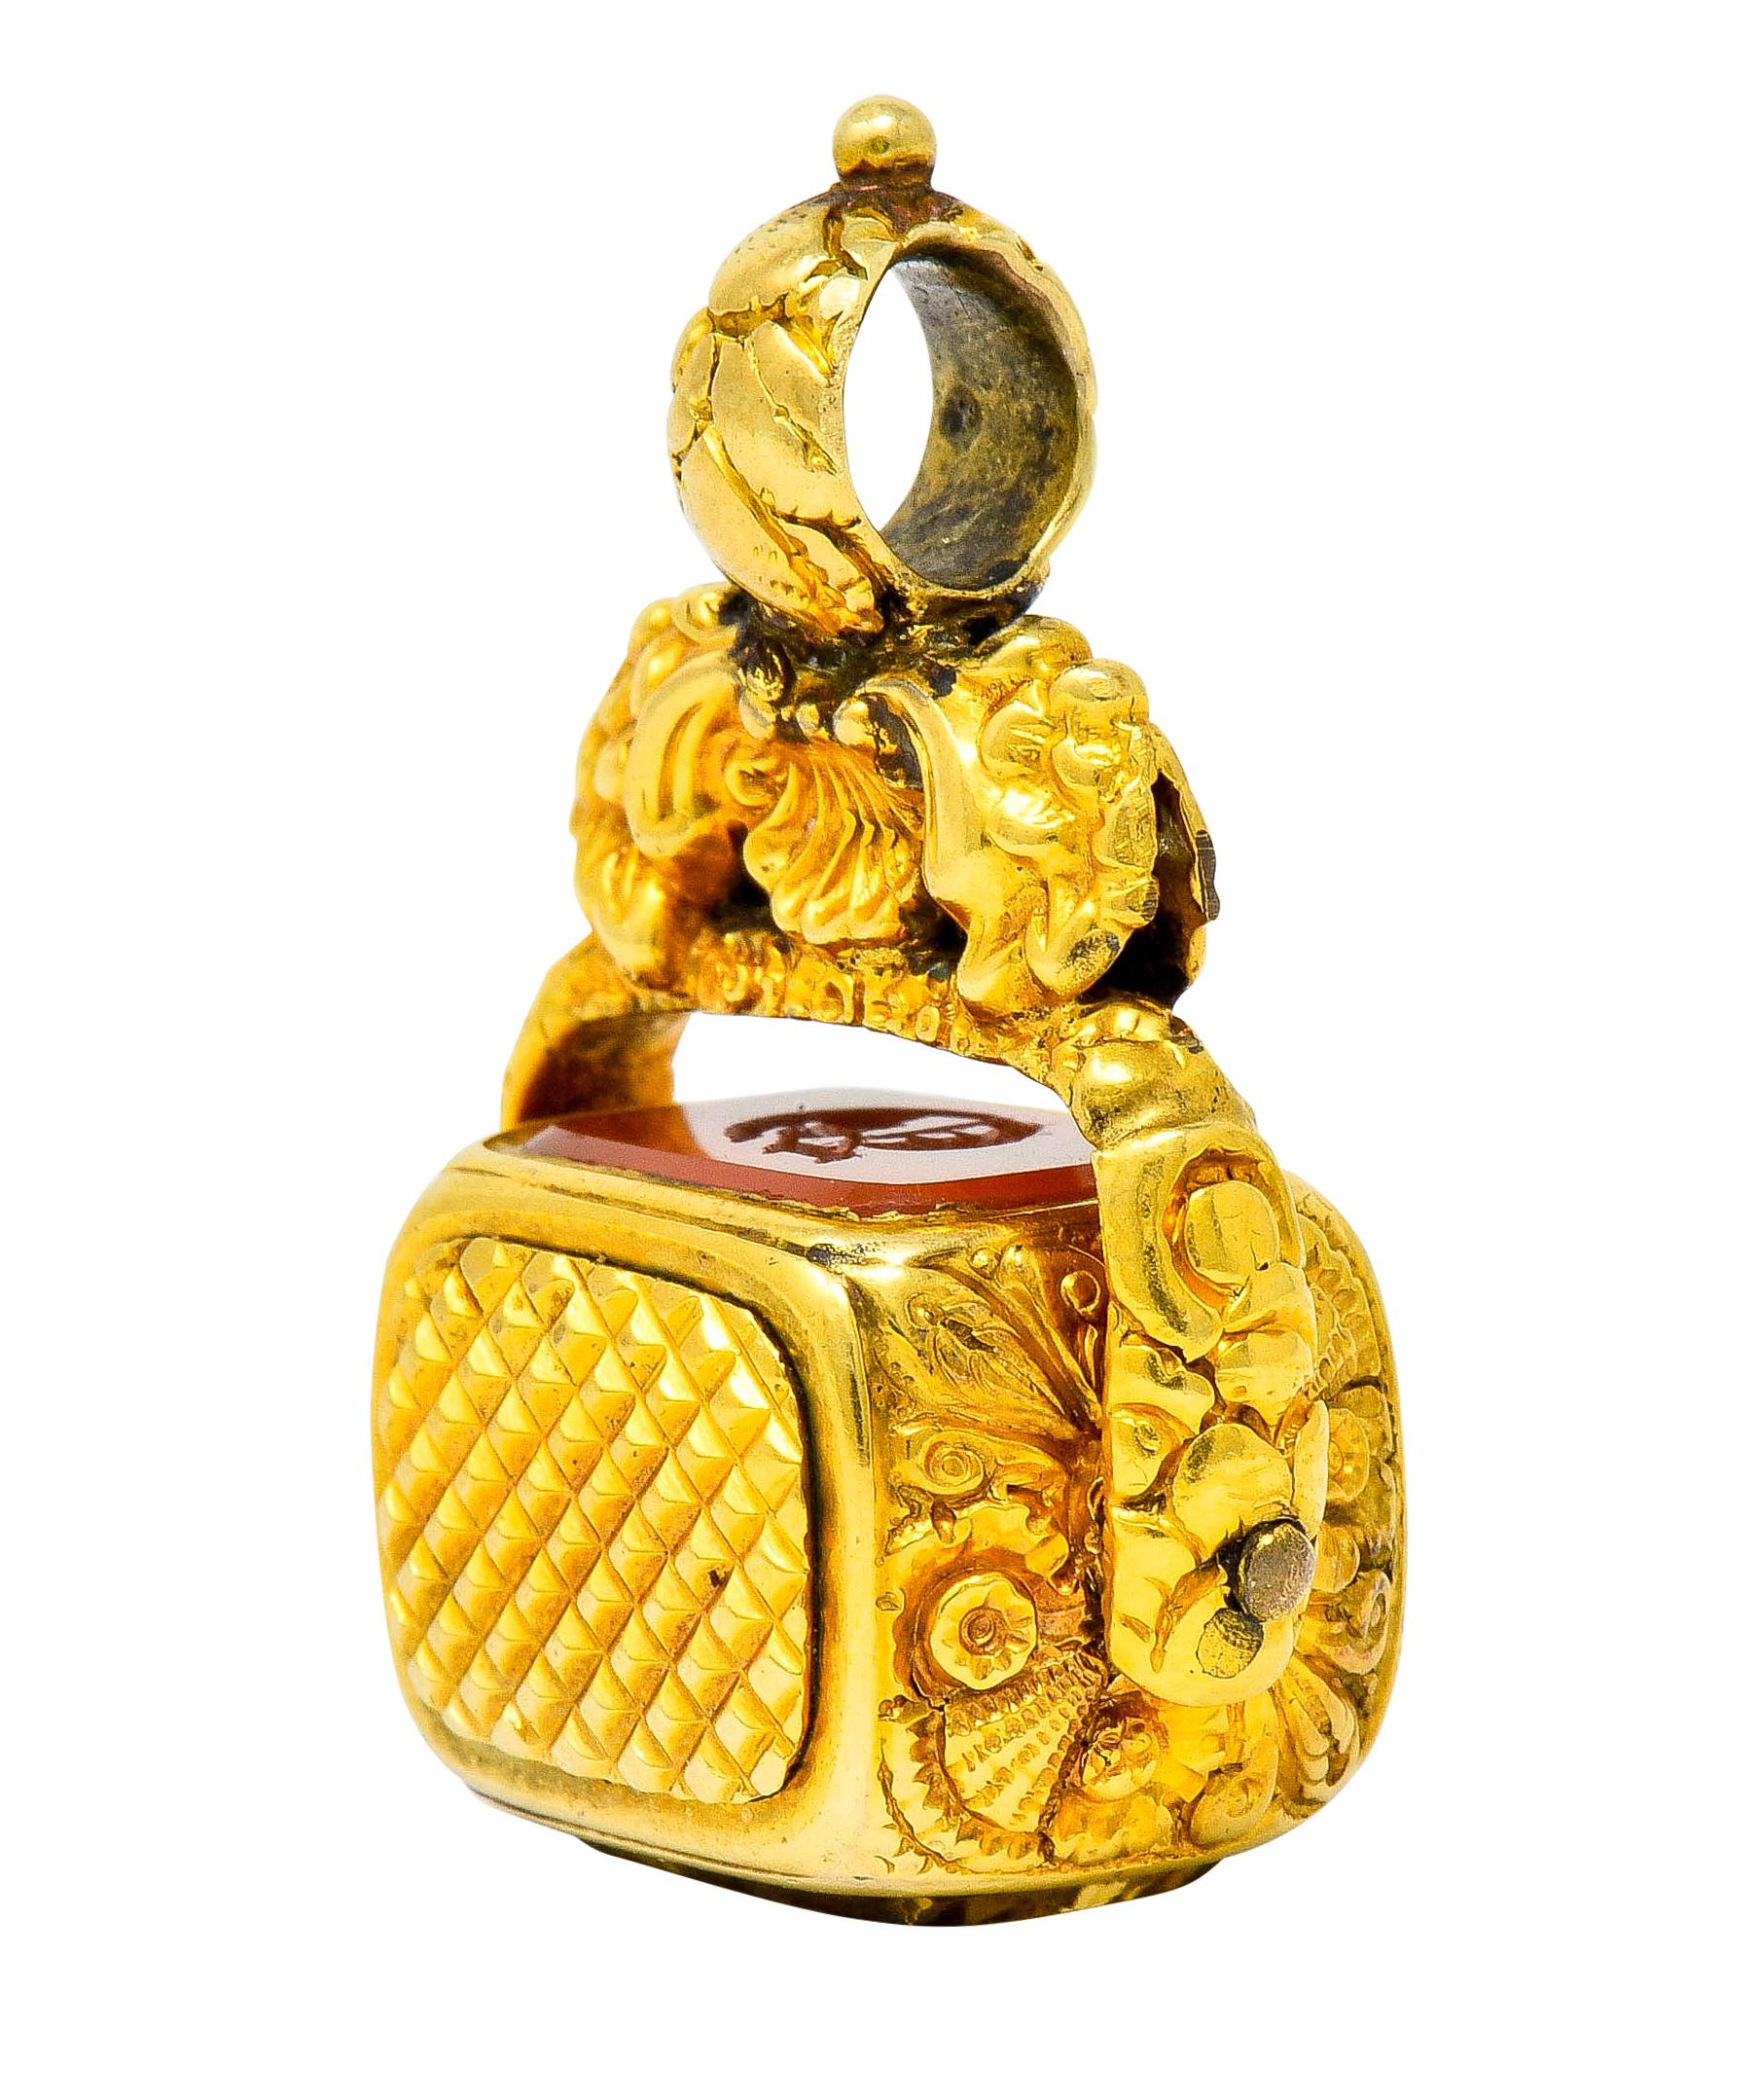 Fob pendant is designed with a stylized shell surmount with a looped floral bale topped by a polished gold bead

Suspending a gold frame decorated as a highly rendered floral motif that holds a rotating rectangular barrel form that has same floral